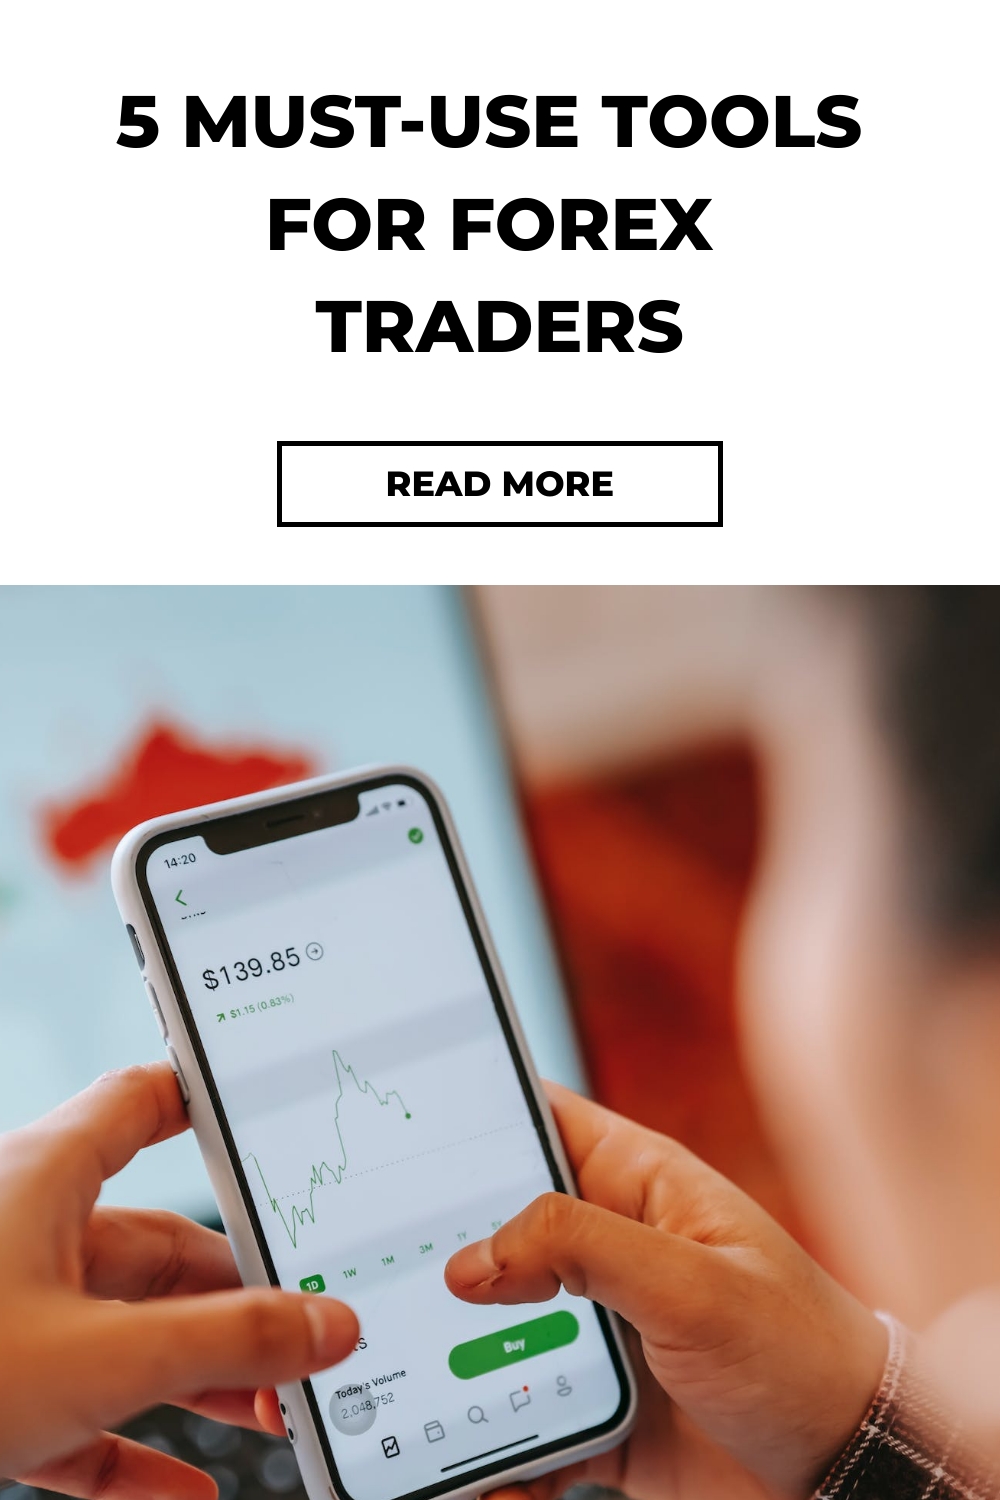 5 Must-Use Tools for Forex Traders